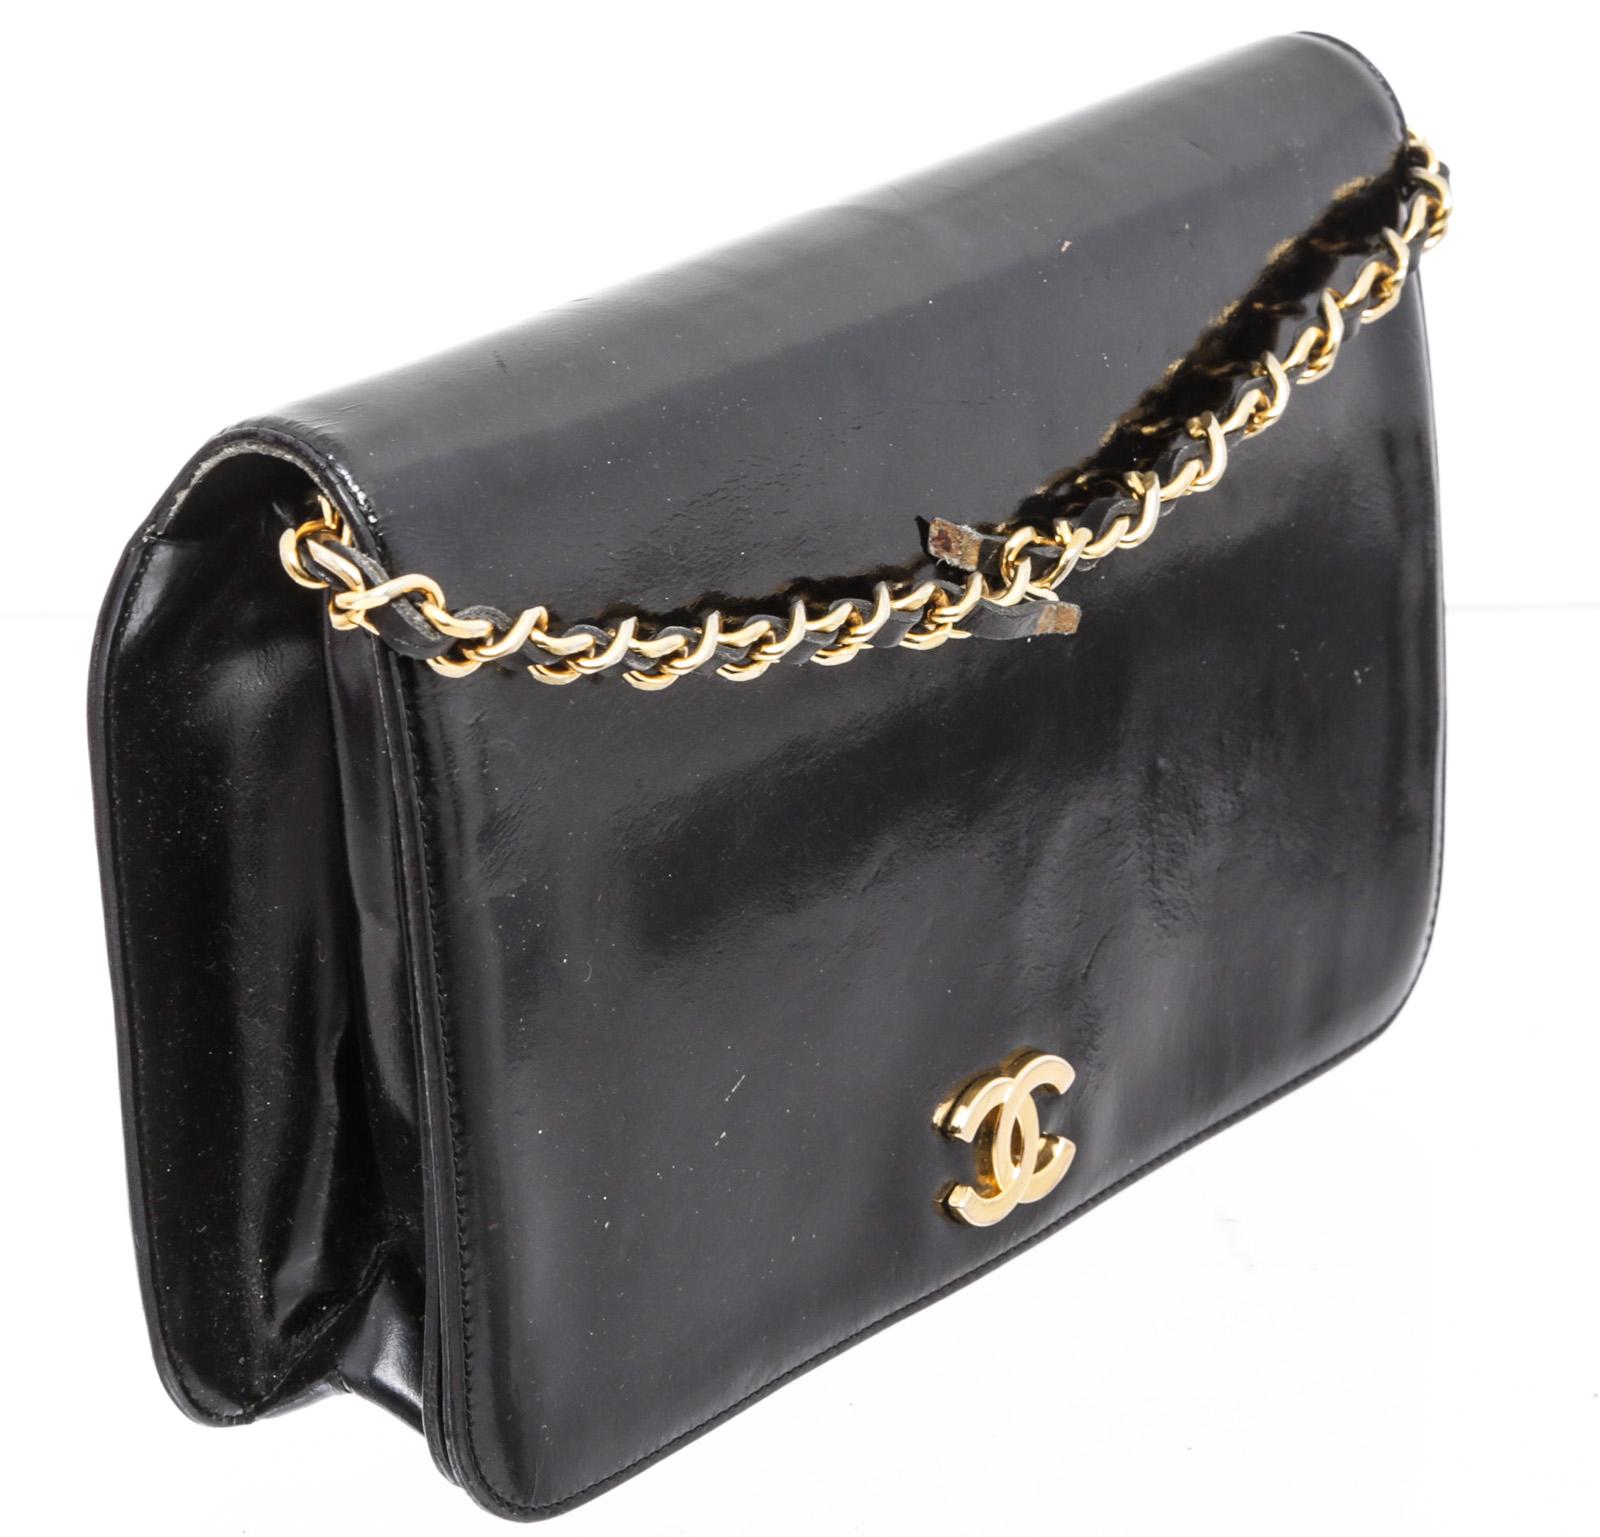 Chanel black patent leather small chain shoulder bag with gold-tone hardware, braided chain and leather shoulder strap, black caviar leather interior, one interior zip pocket and overall snap closure featuring CC hardware logo.

24282MSC